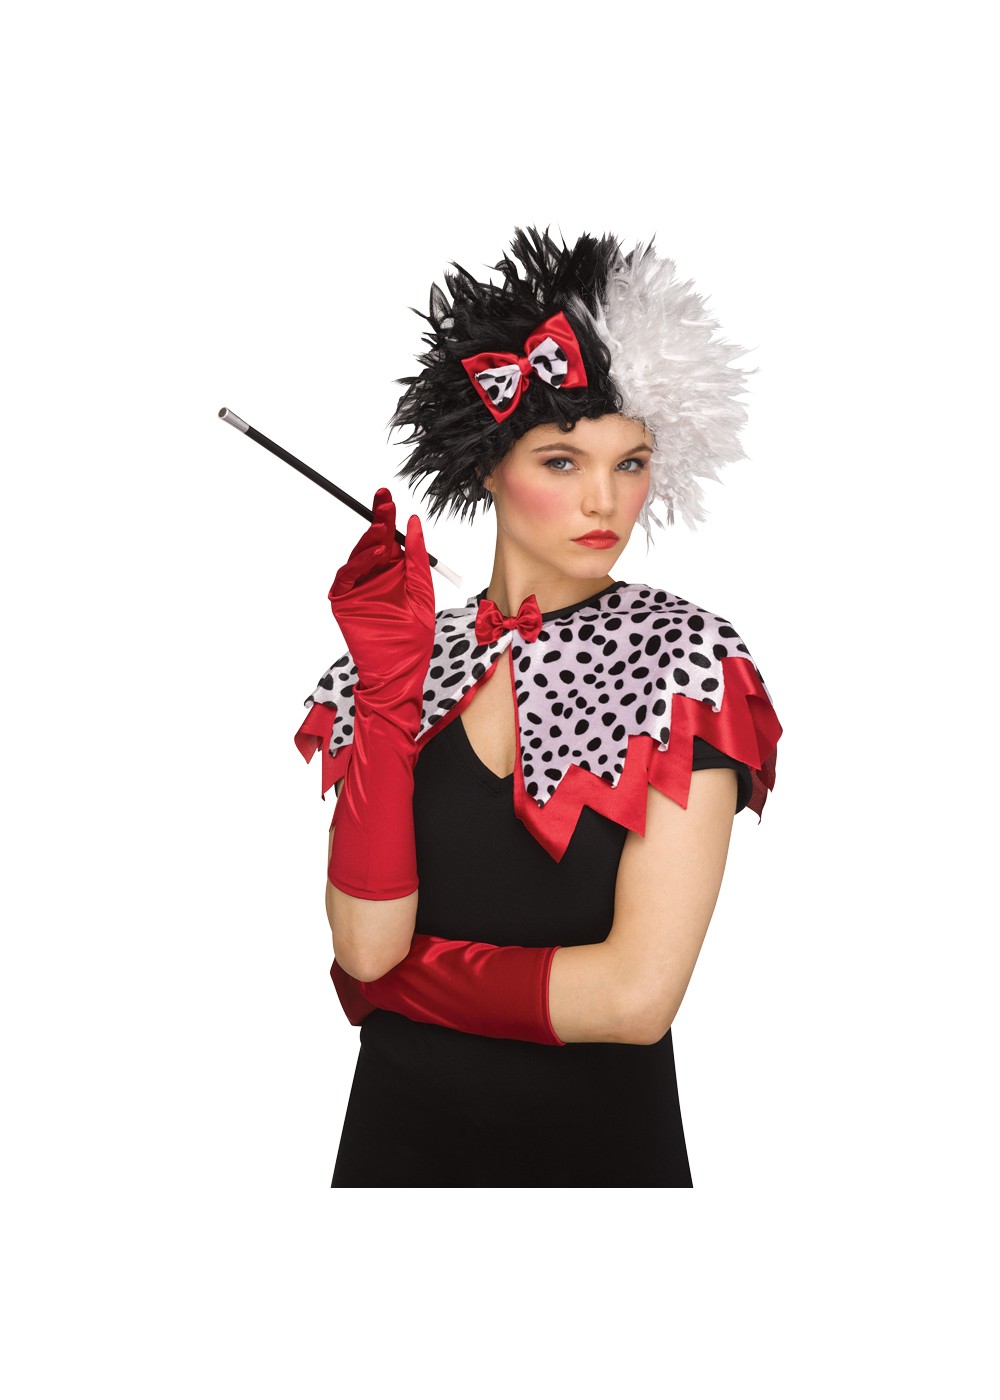 Big selection of 2021 Halloween Costumes for Women